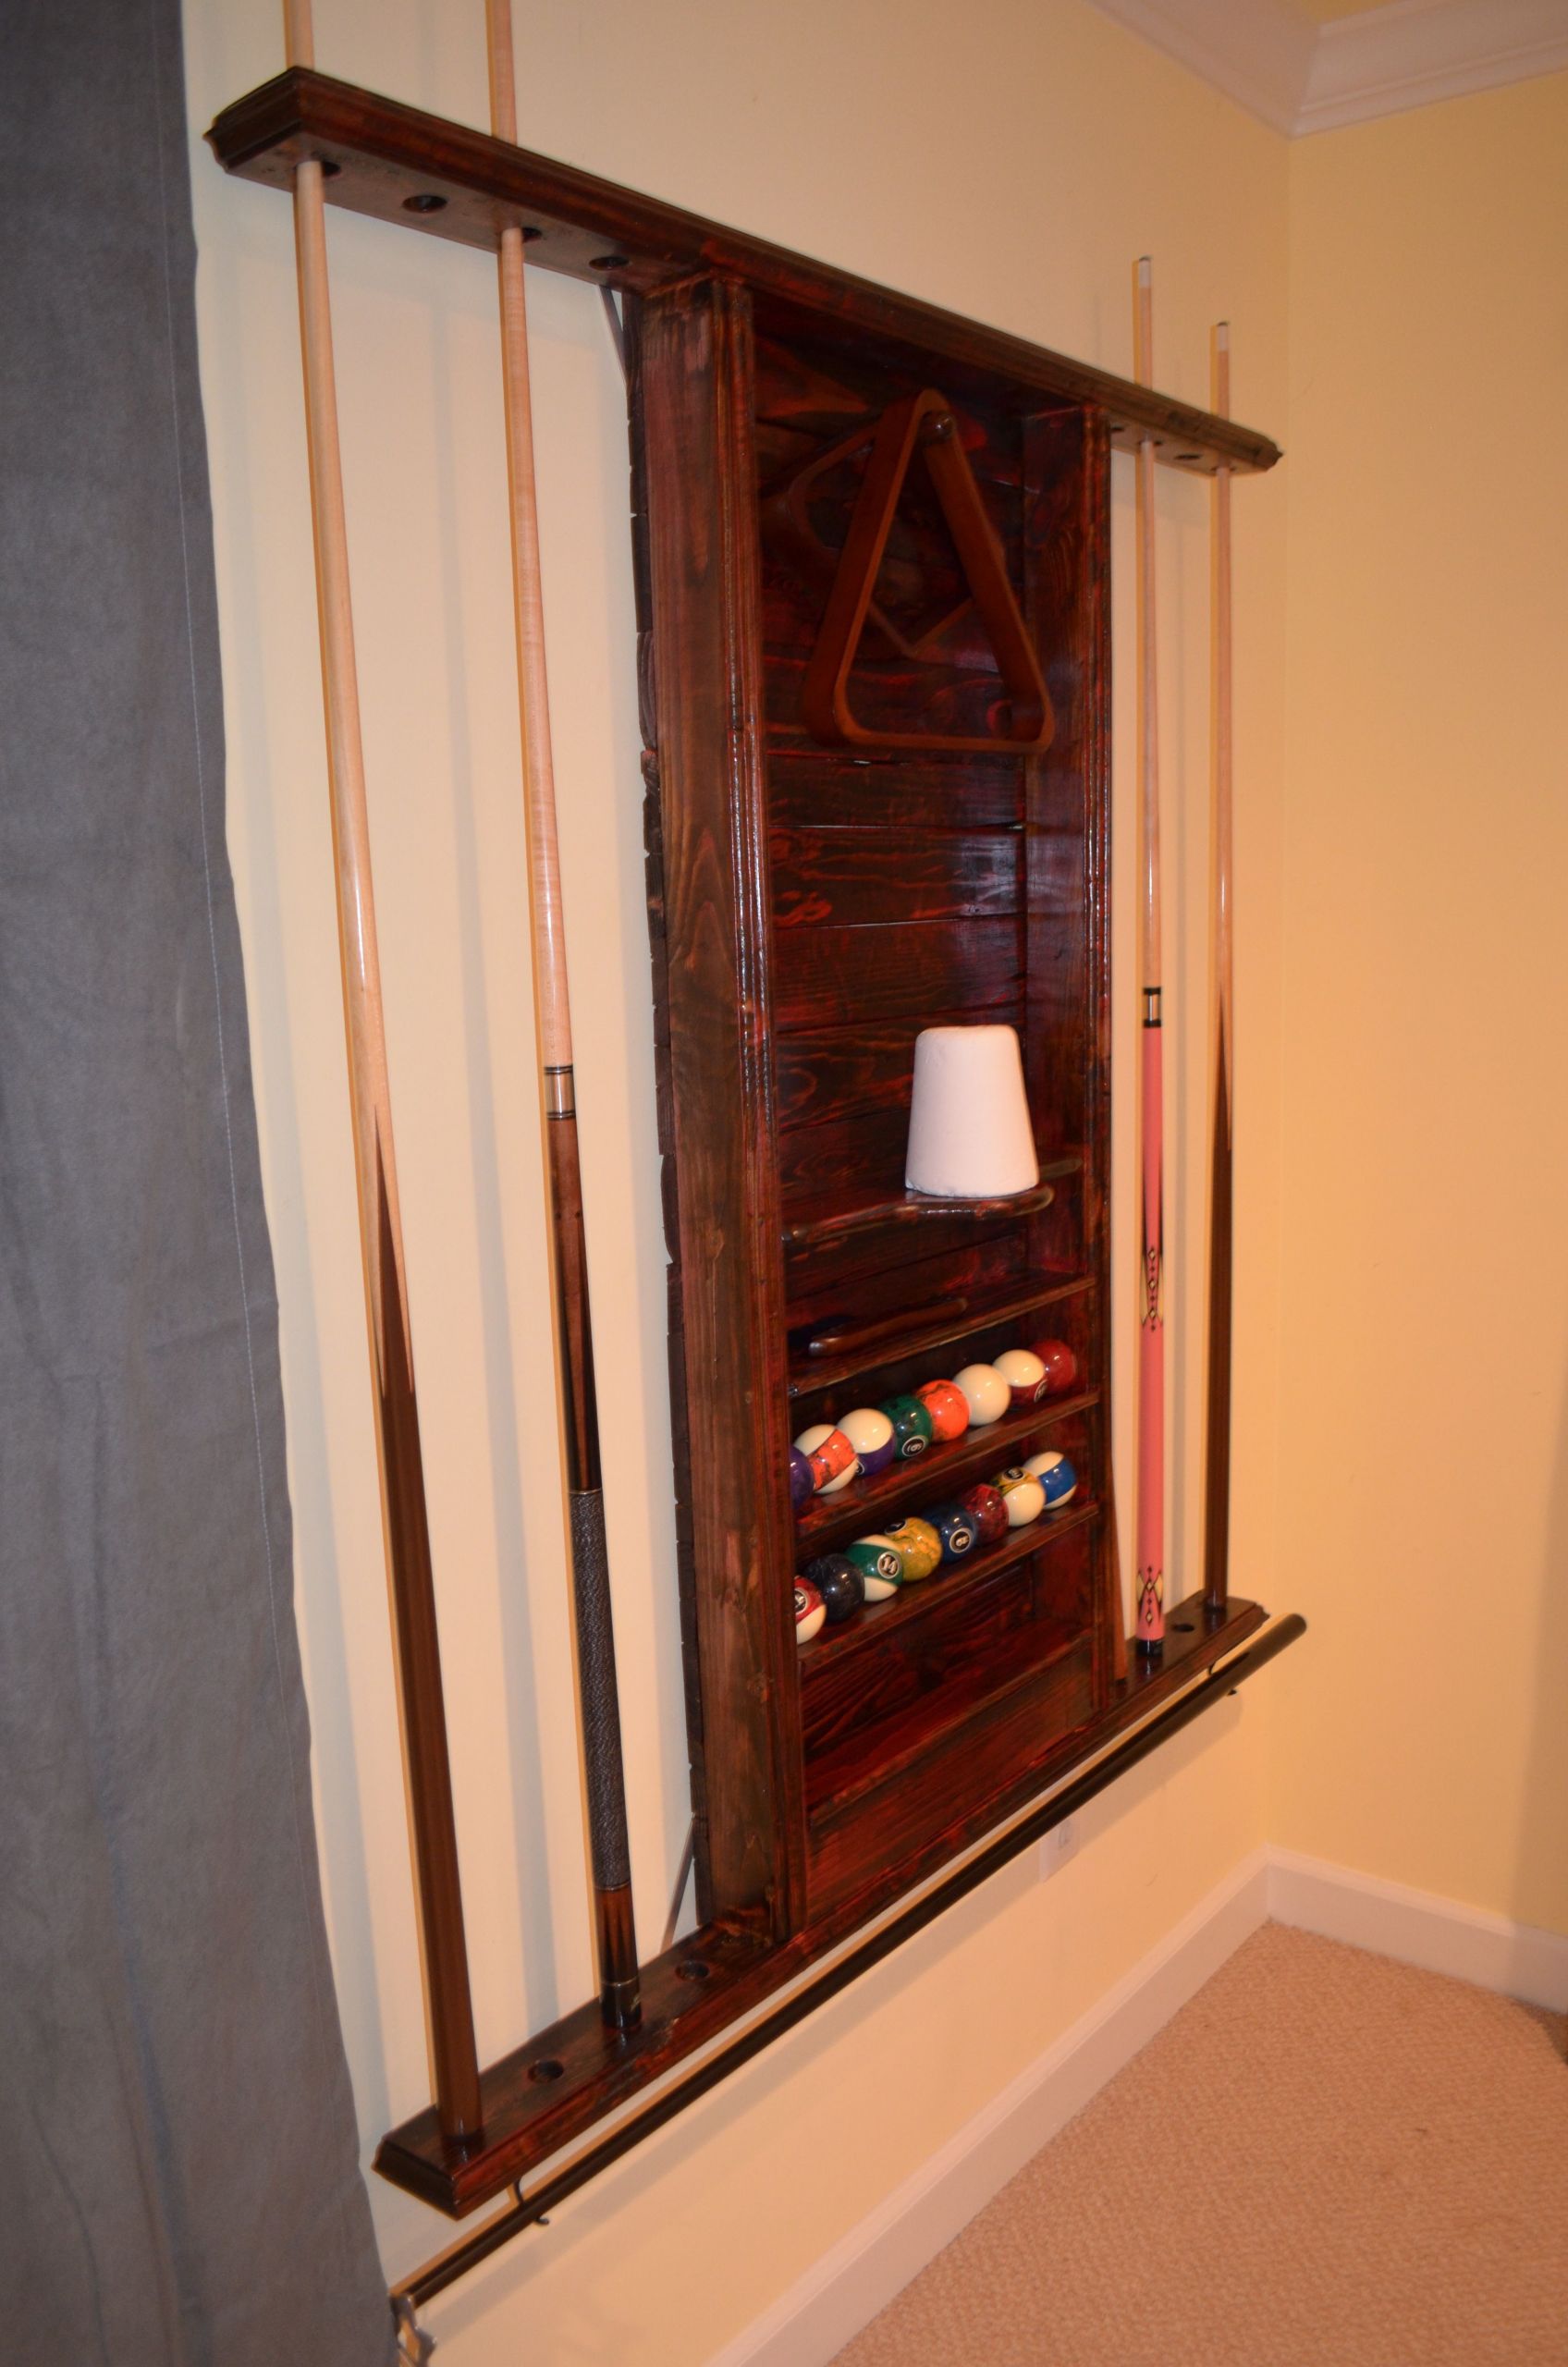 DIY Pool Cue Rack
 Billiard Cue Rack made from pallets We made this from